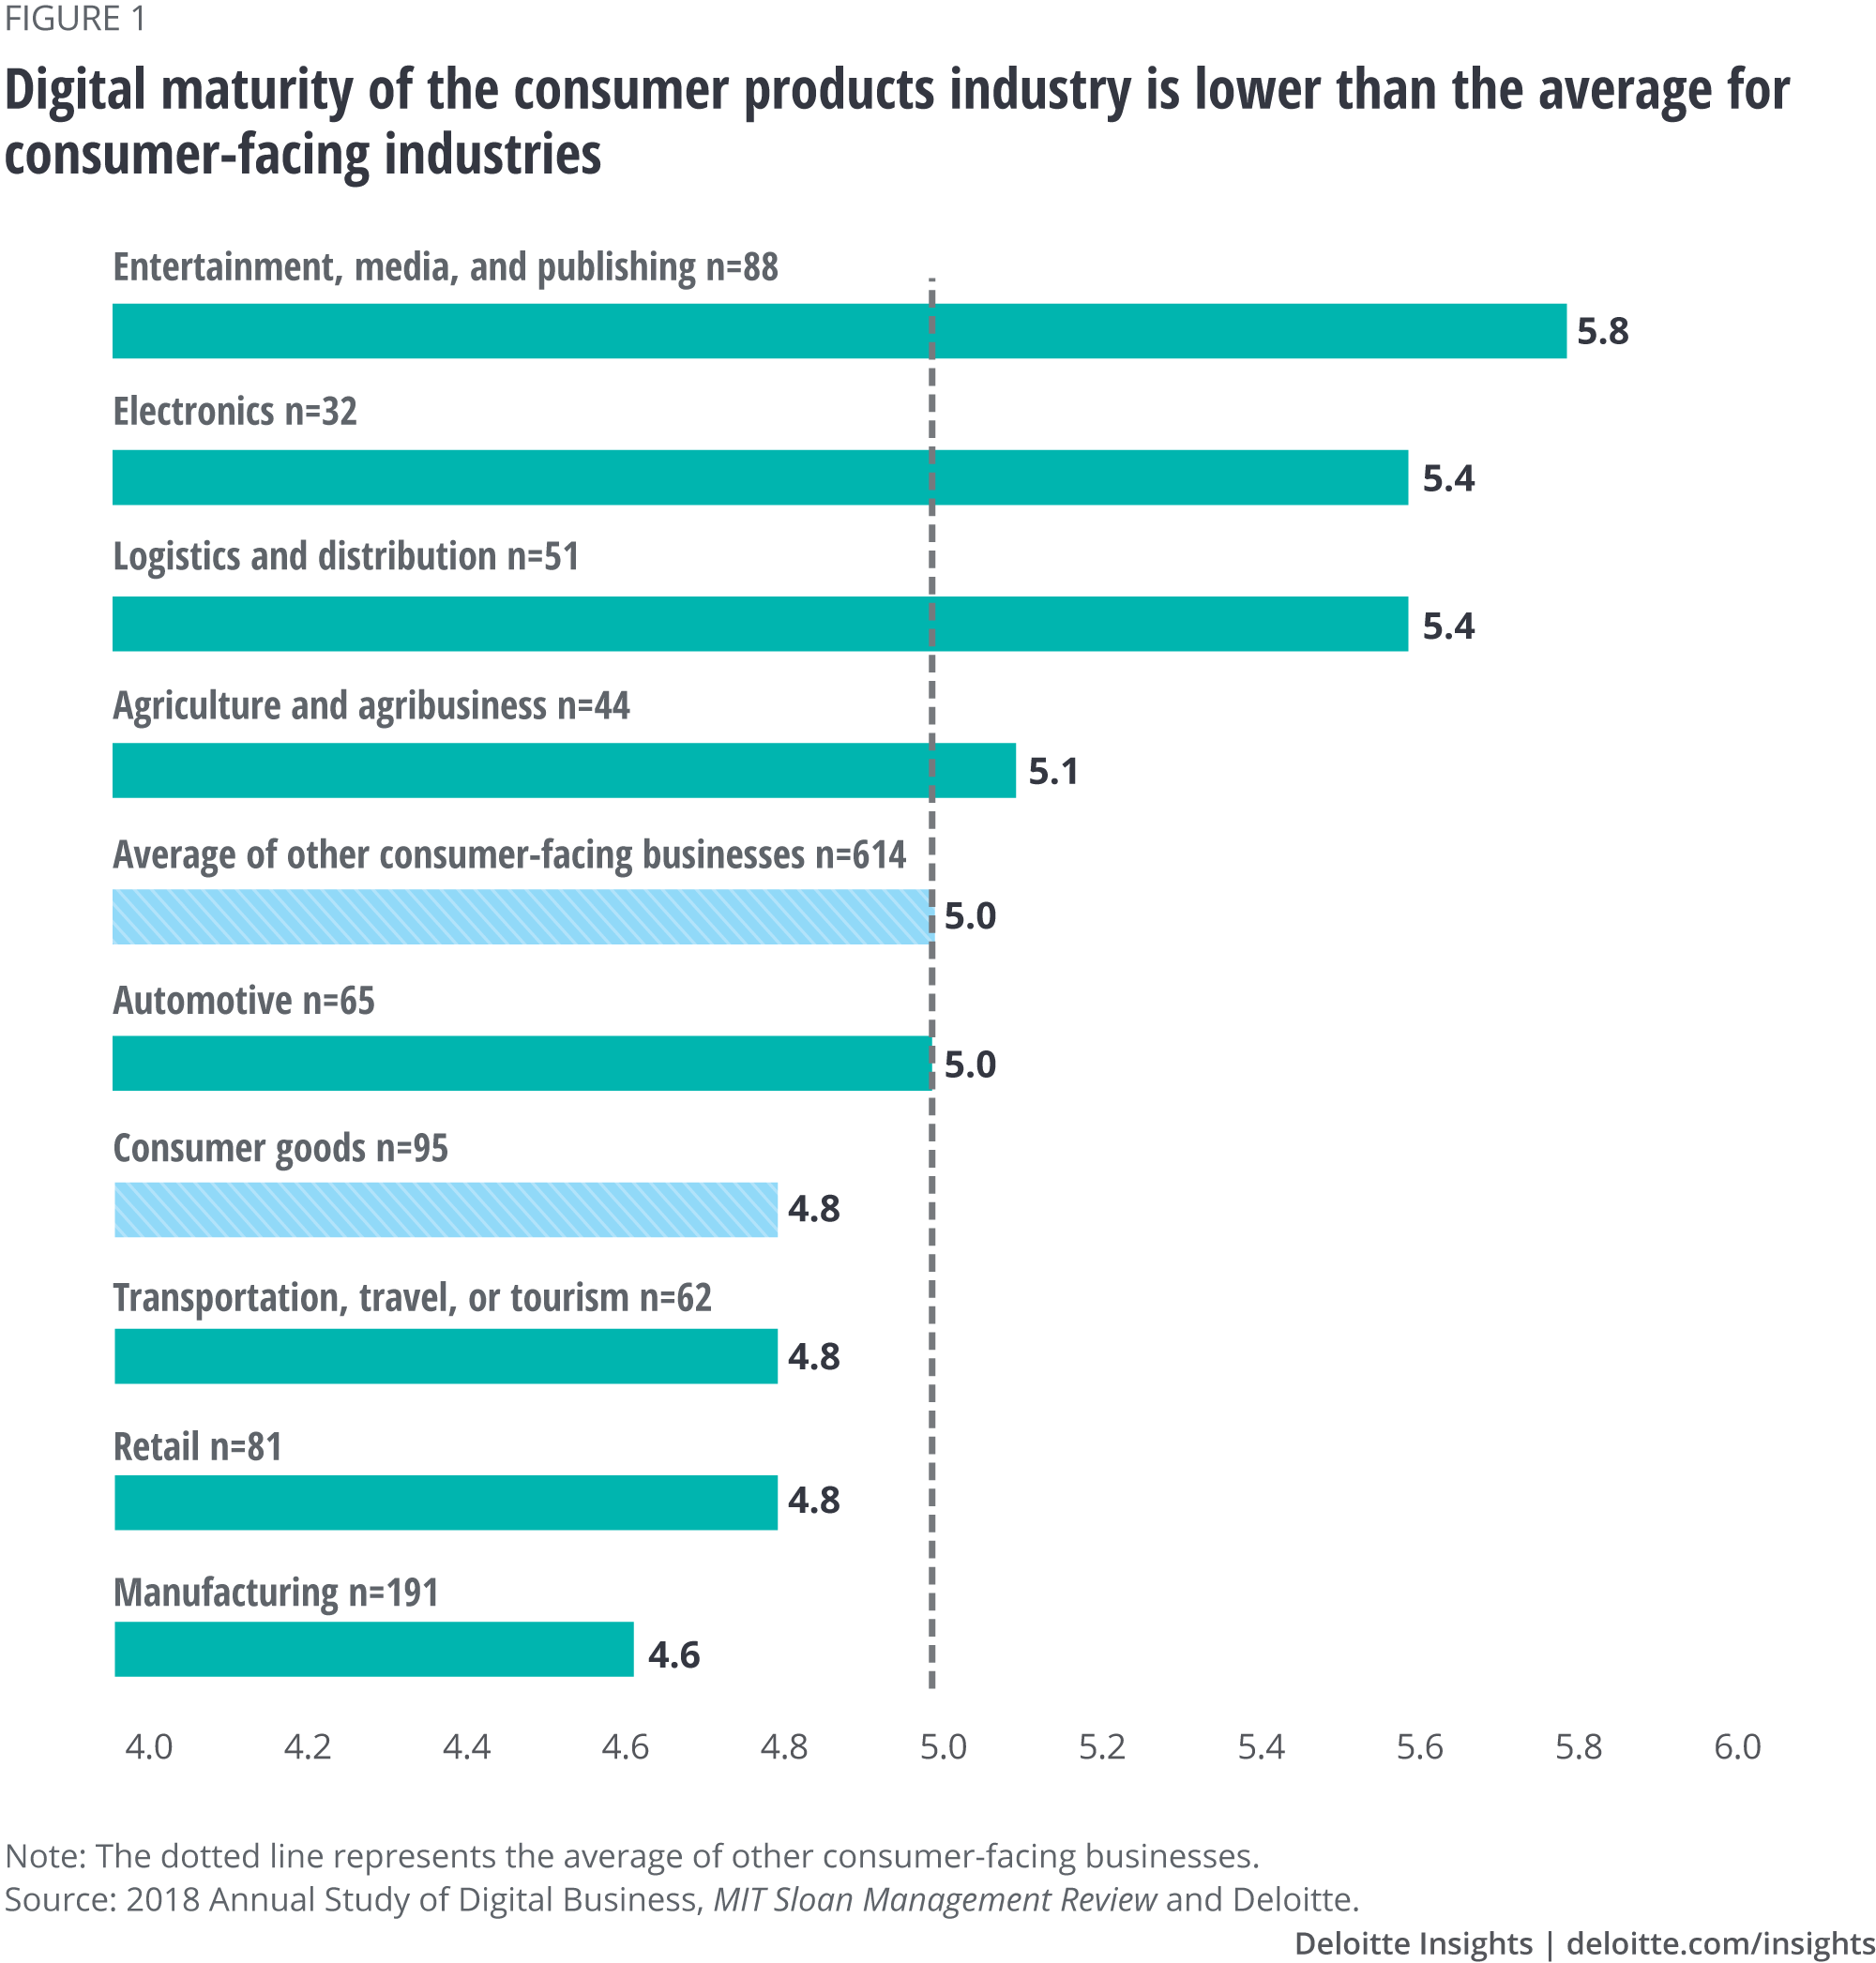 Digital maturity of the consumer products industry is lower than the average for consumer-facing industries